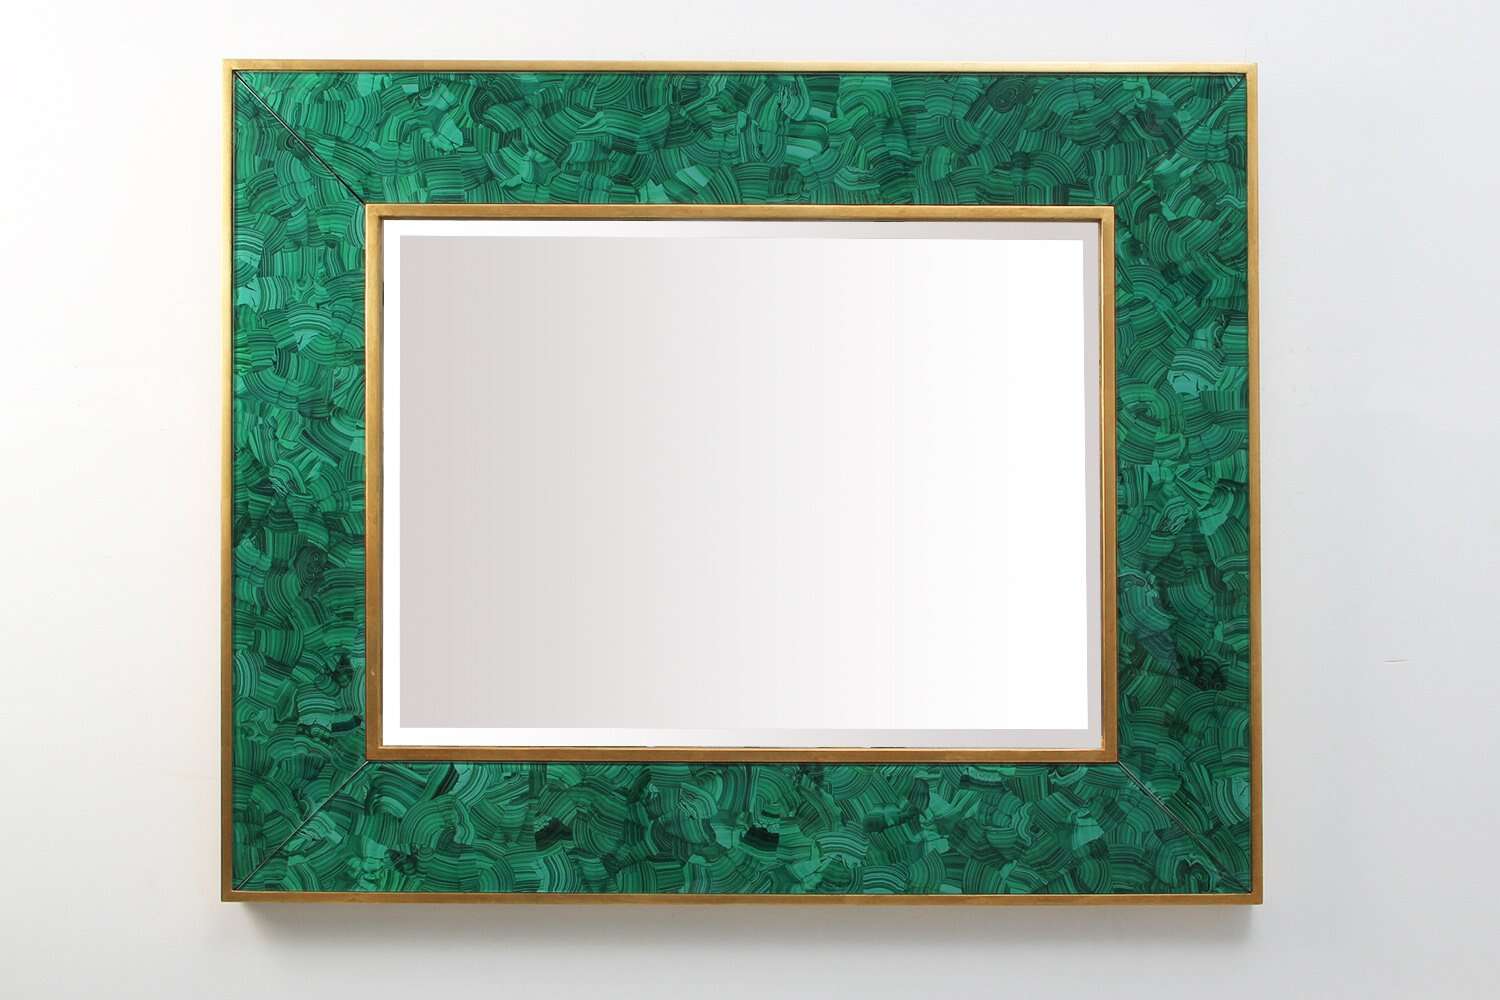 Luxury Wall mirror in malachite and gold leaf